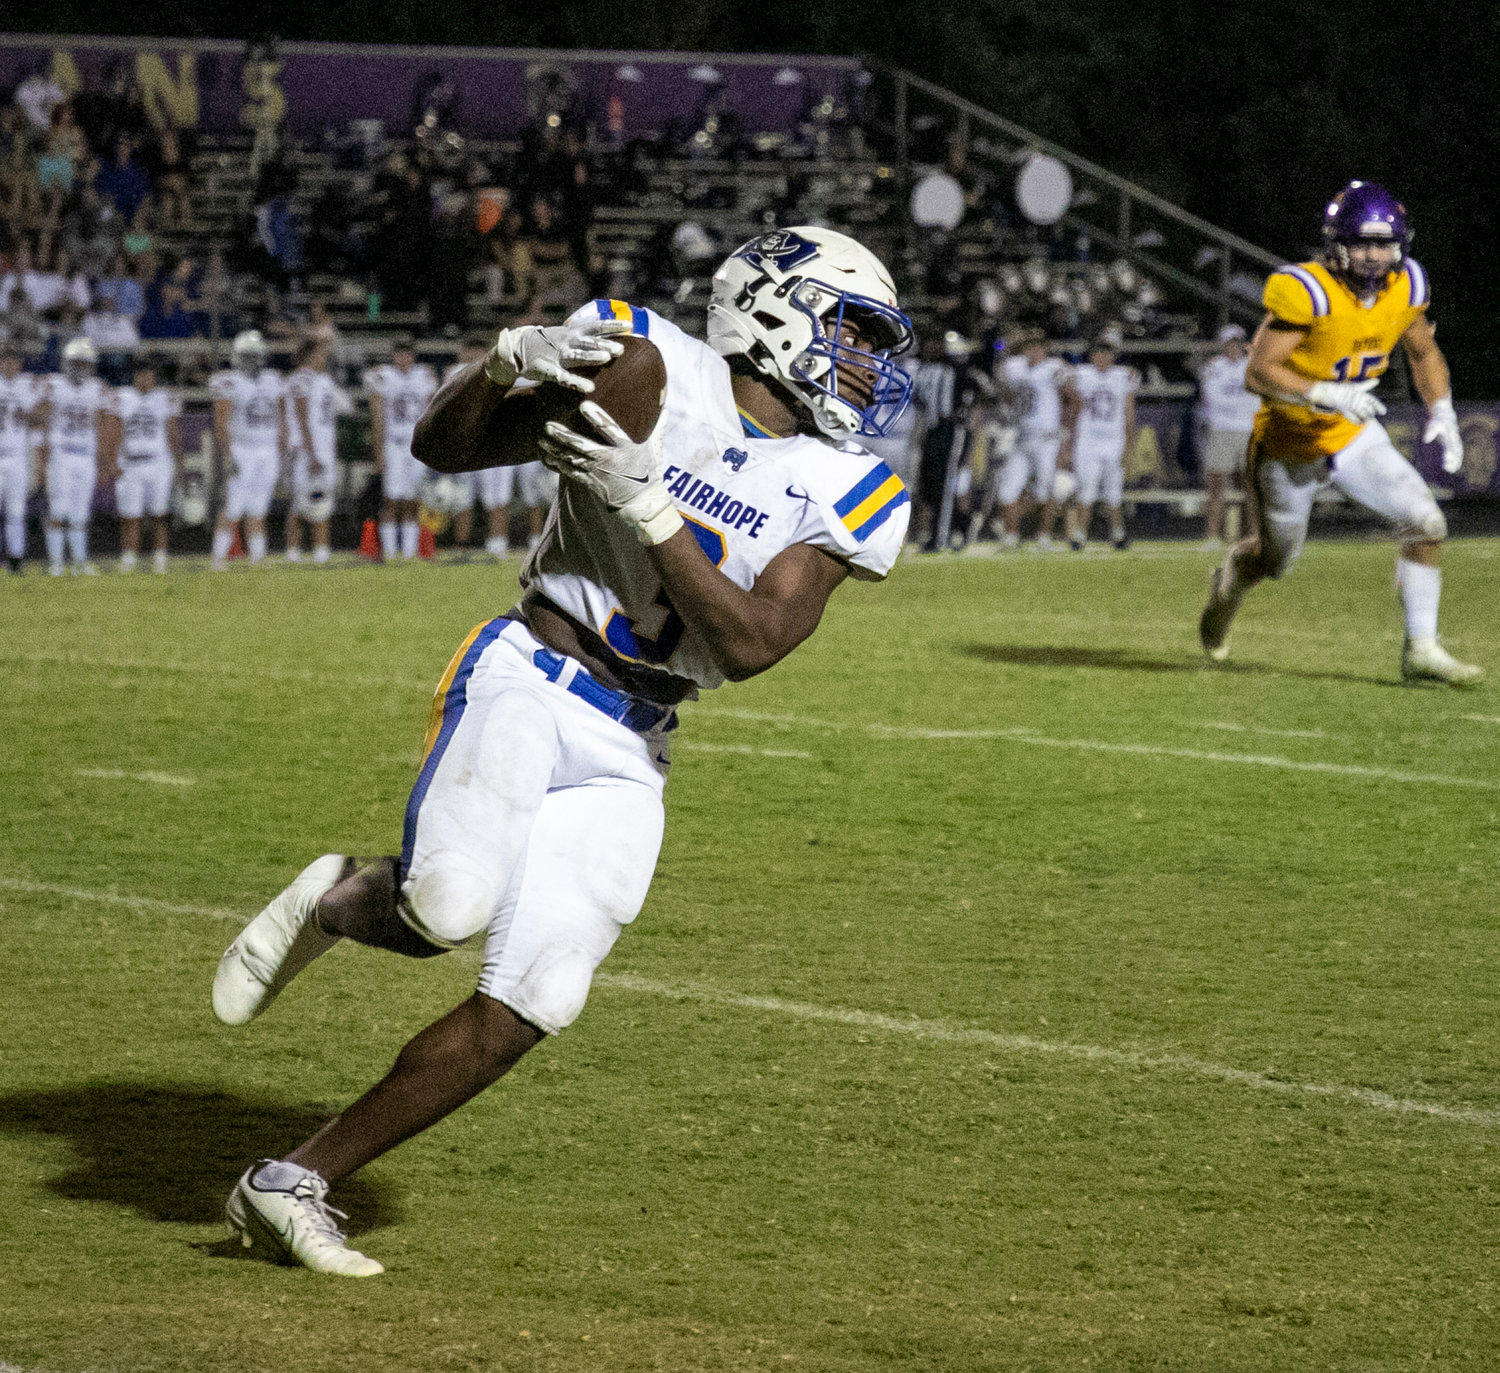 Fairhope junior Preston Godfrey secures a catch and looks for running room during the Class 7A Region 1 game between the Pirates and Daphne Trojans Friday night at Jubilee Stadium in Daphne. Godfrey ran for touchdowns and caught another in Fairhope’s 26-7 win.